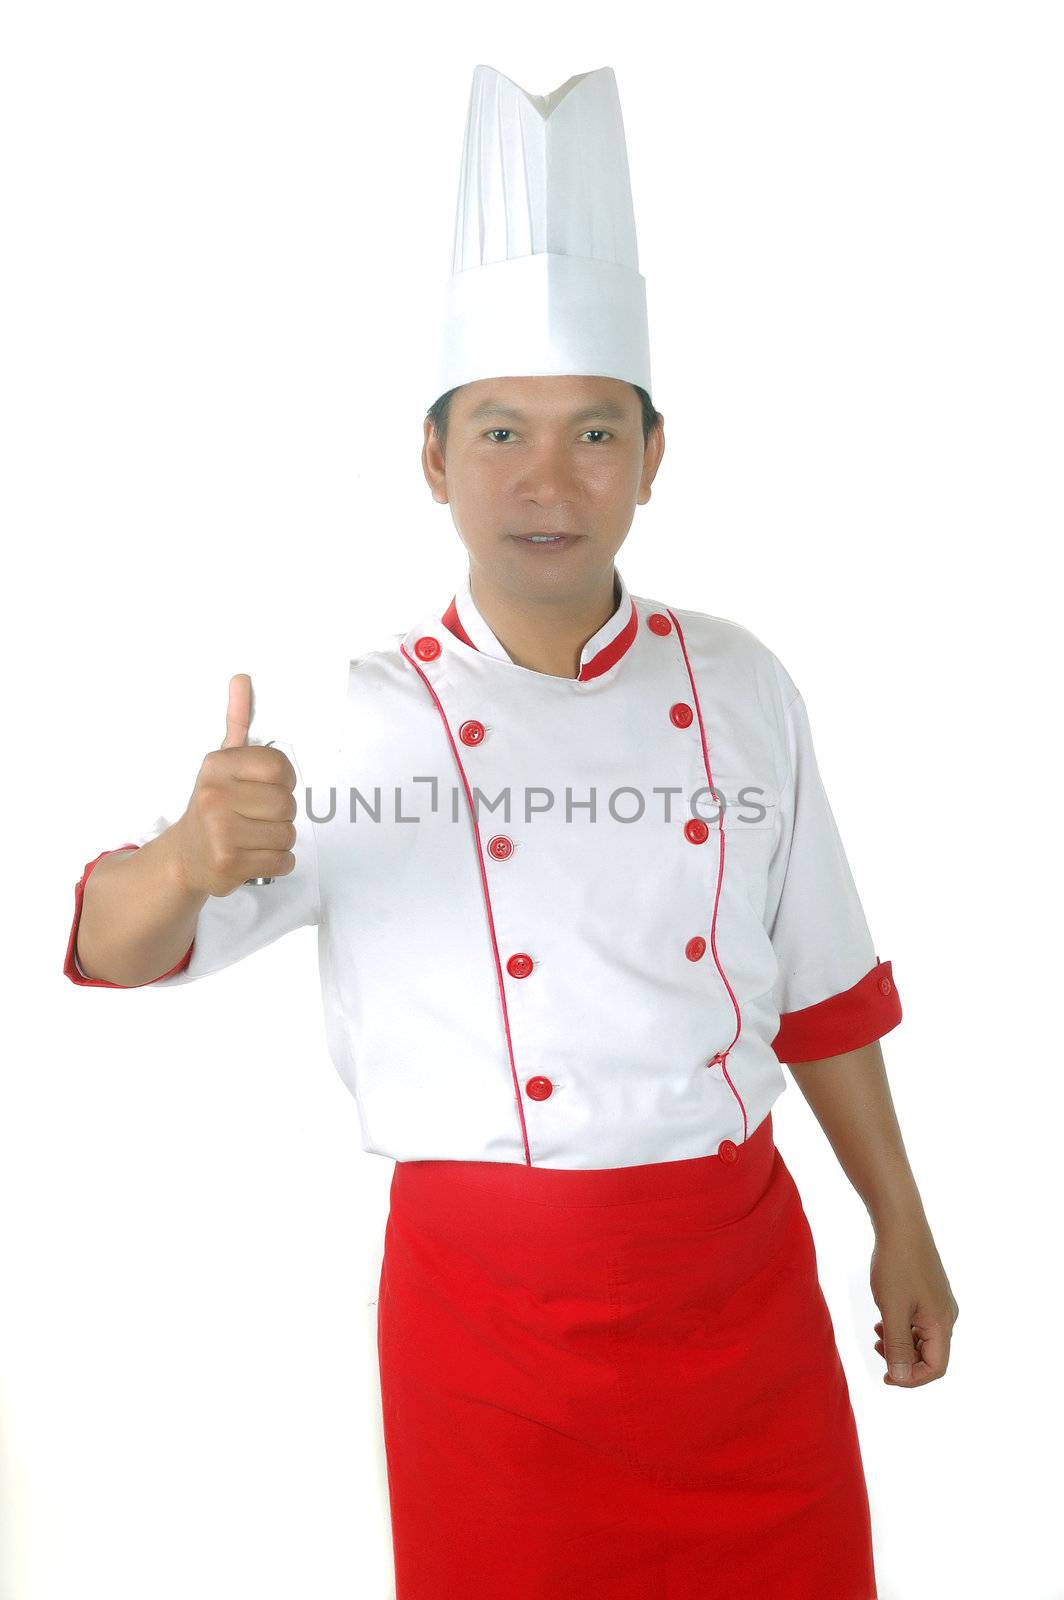 chef gives thumbs up sign  by antonihalim